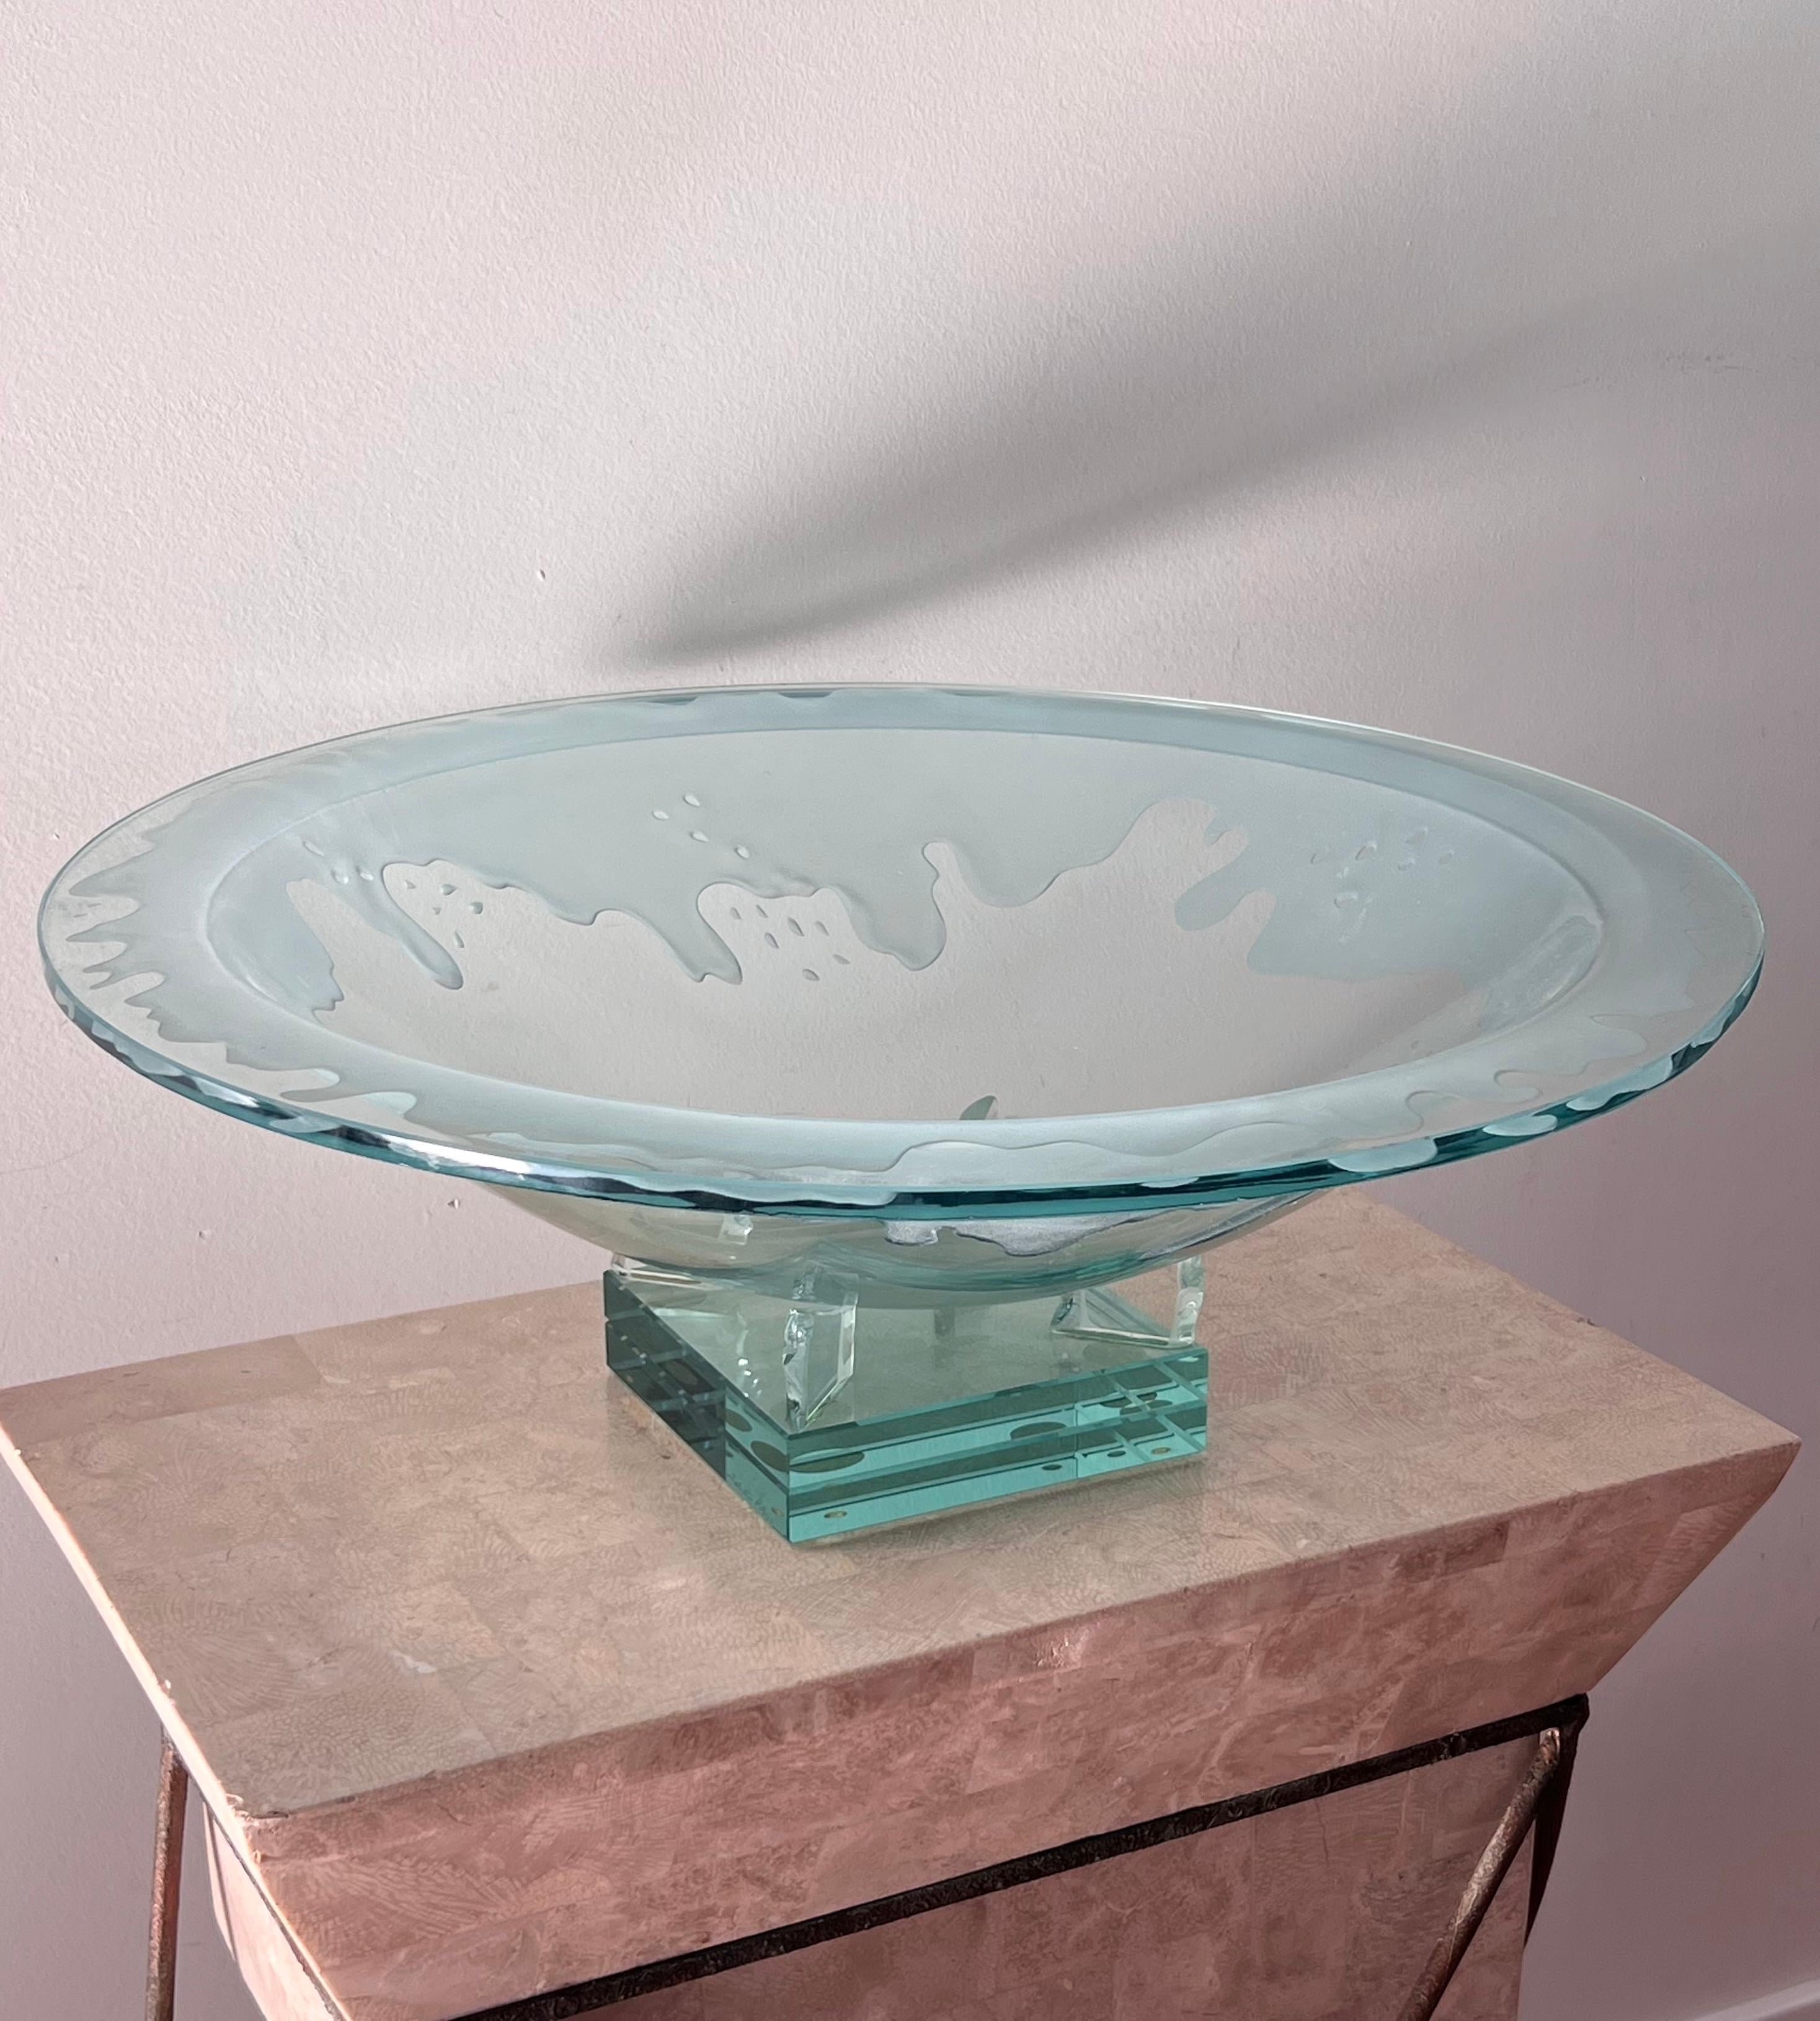 An impressive and monumental art glass bowl, late 20th century. Featuring frosted glass in a “dripping liquid” motif. Platter sits atop a stacked art glass plinth. Light scratches but no chips or losses. Pick up in central west Los Angeles or we